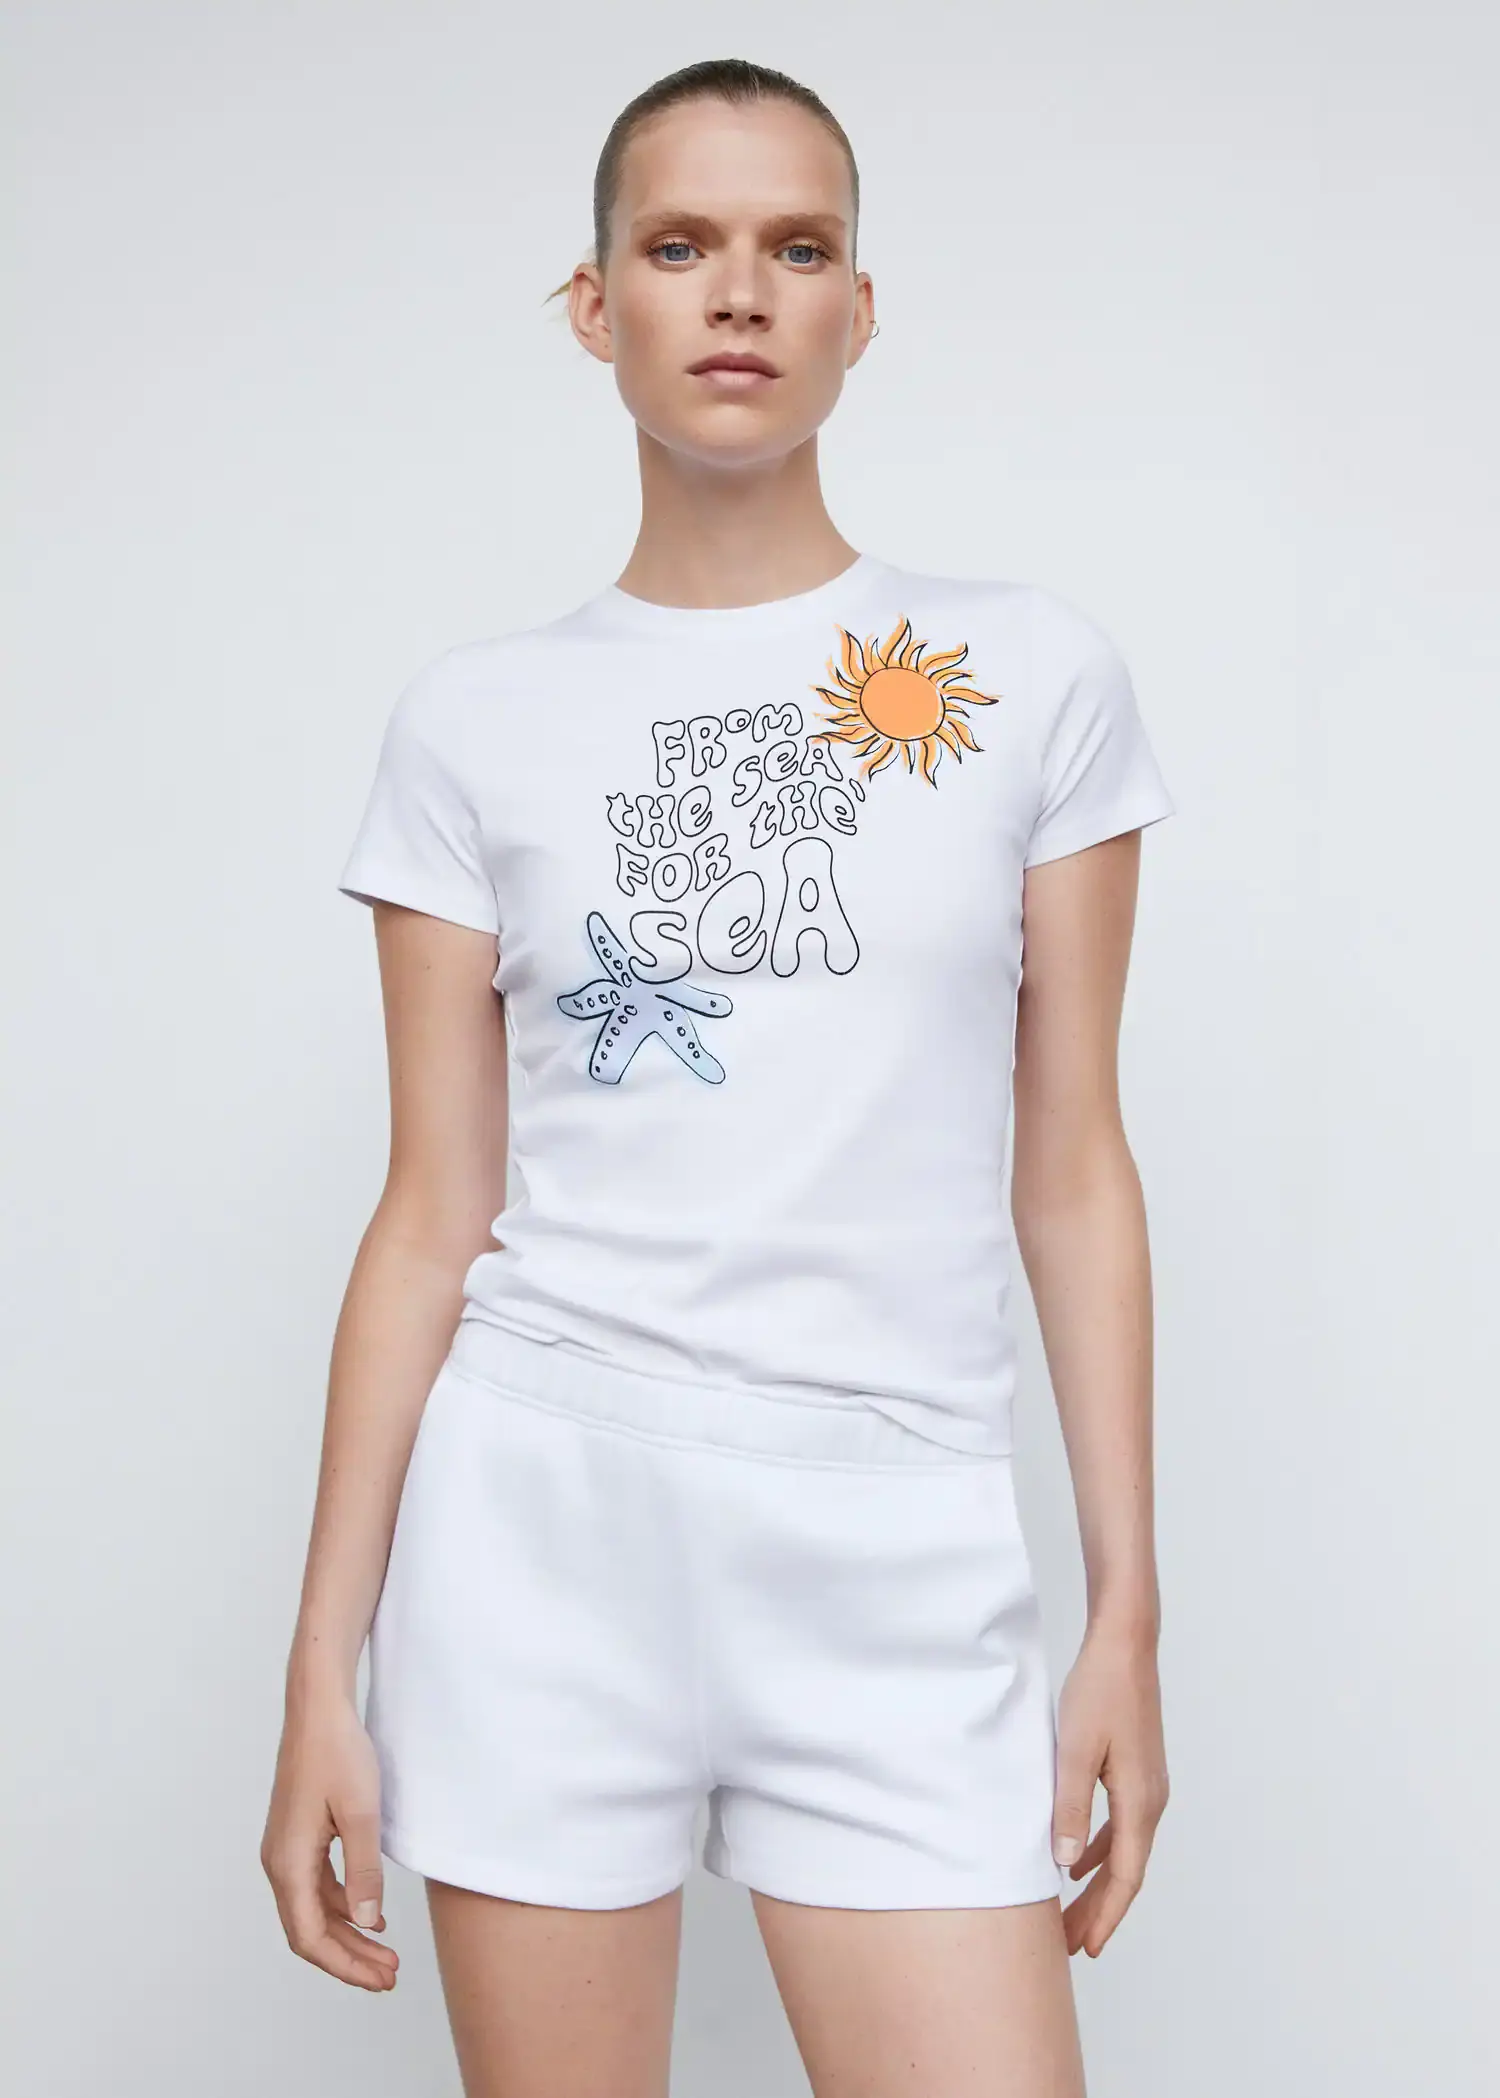 Mango Oceans Day T-shirt. a woman wearing a white t-shirt and shorts. 